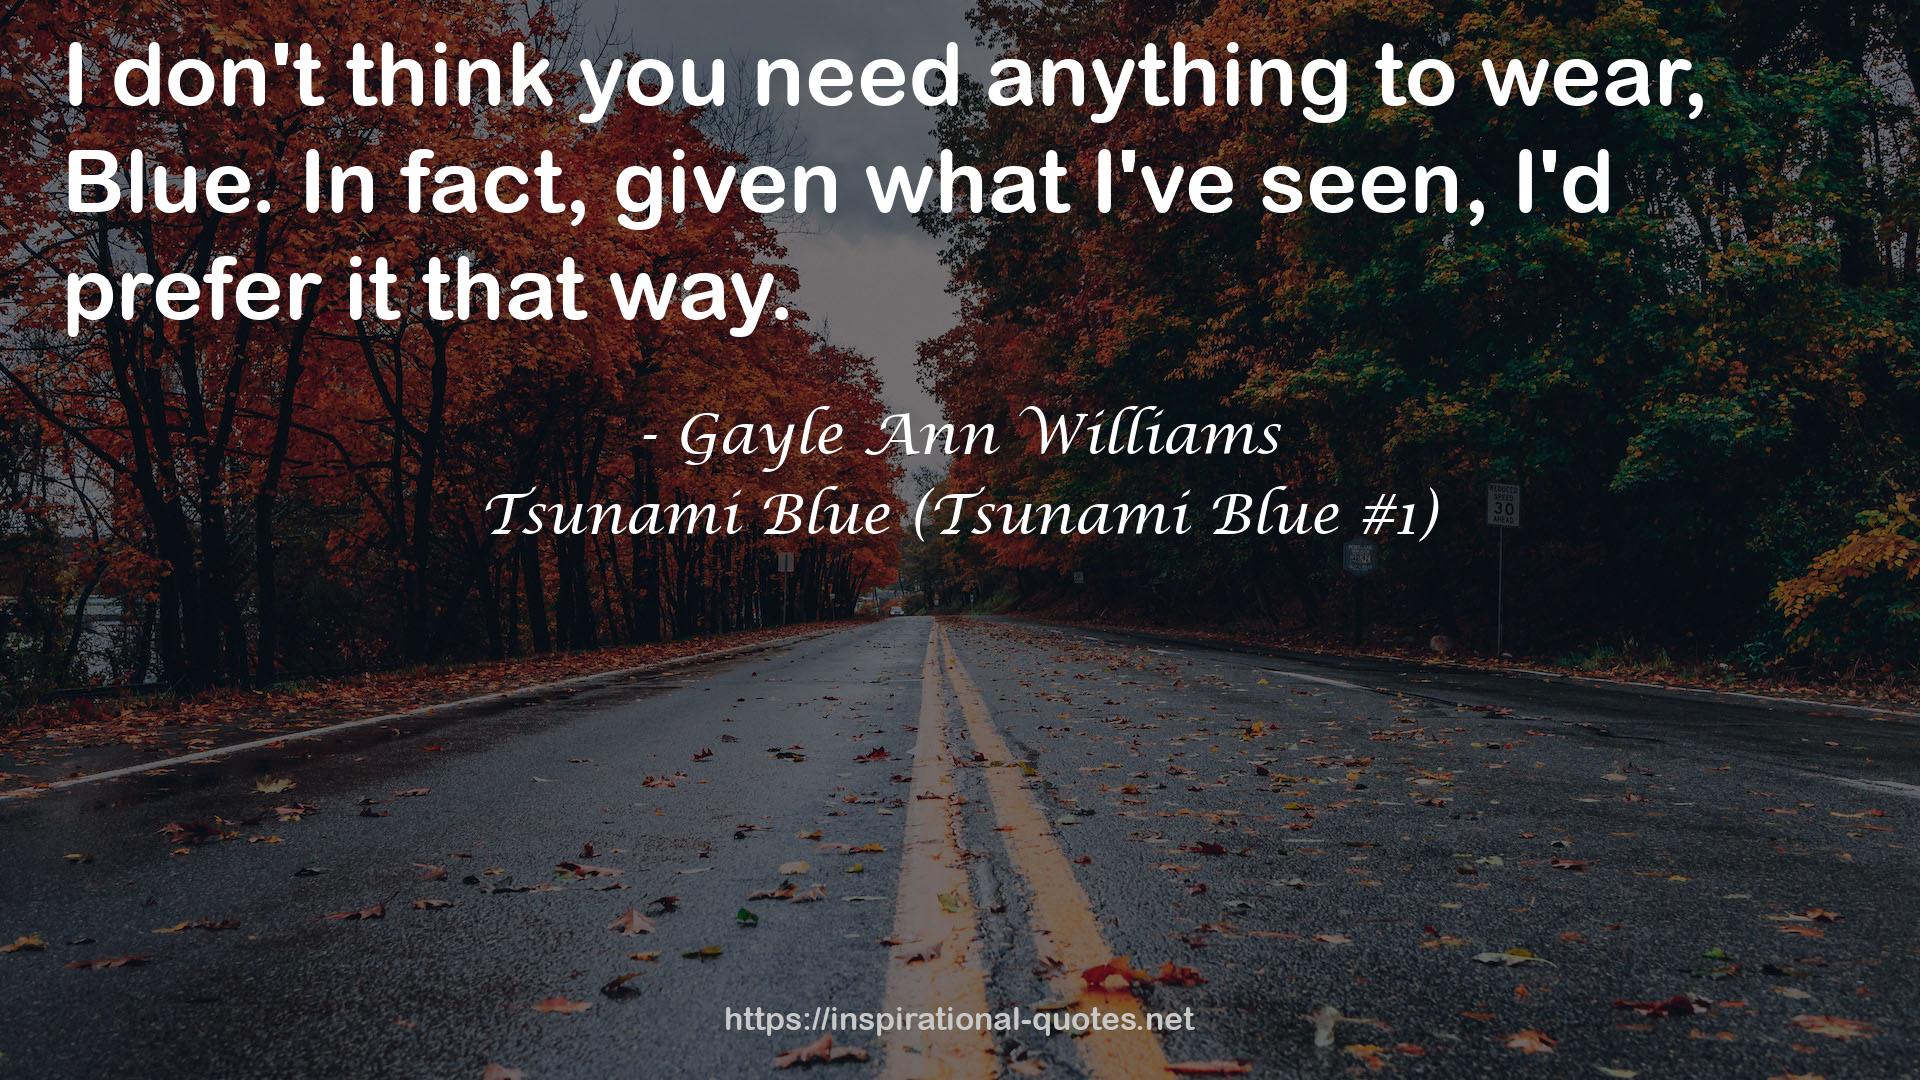 Gayle Ann Williams QUOTES